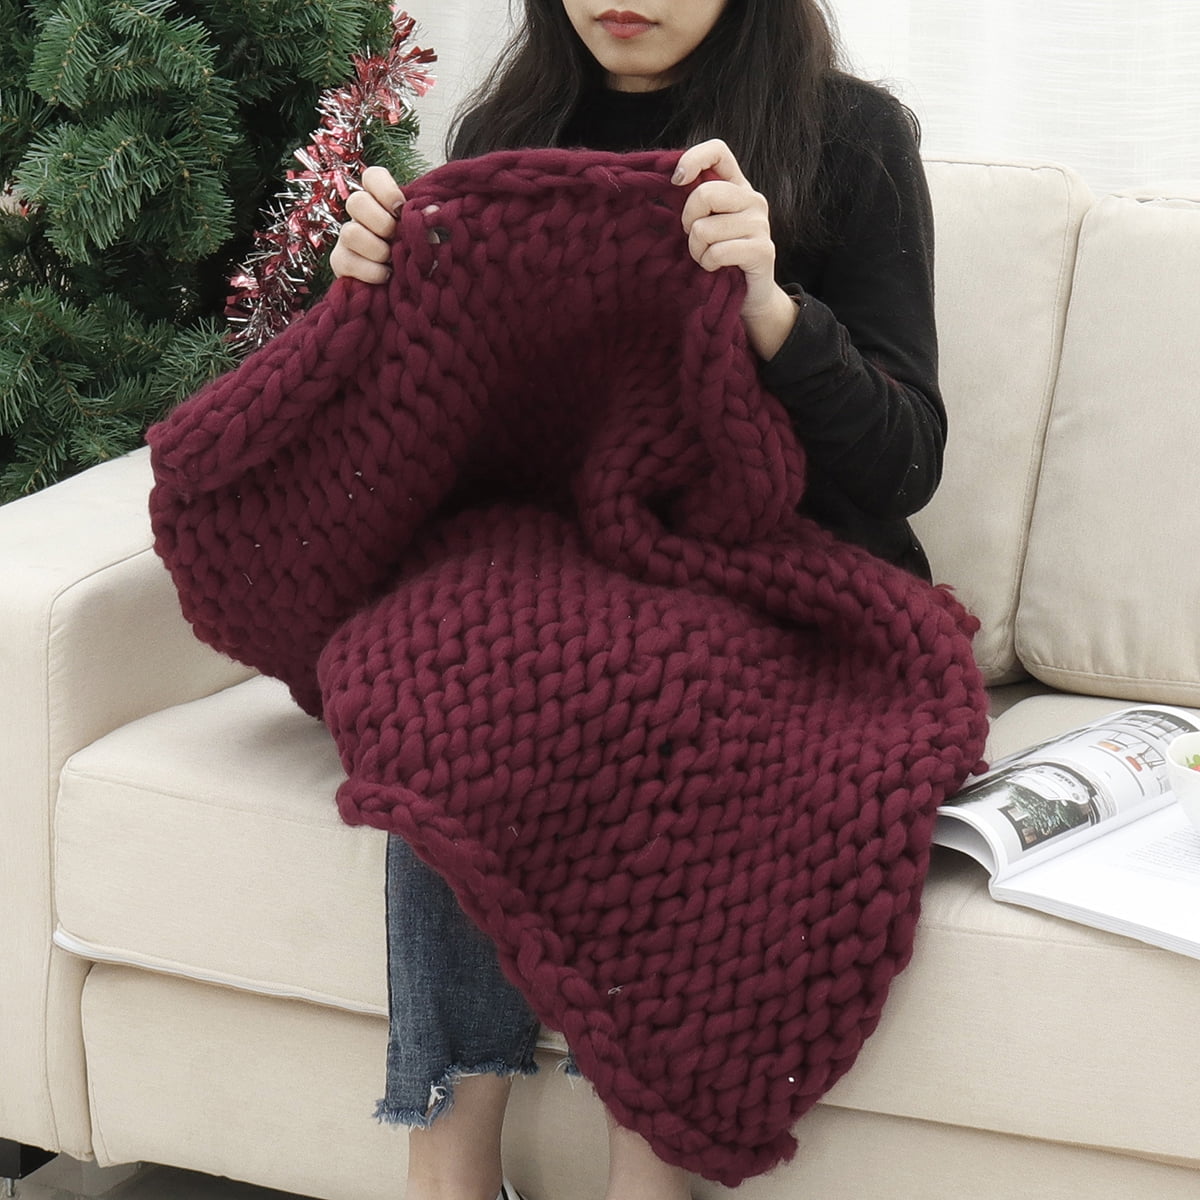 Hand-woven Bulky Soft Chunky Knit Blanket Thick Yarn Bedding Sofa Knitted Throw 